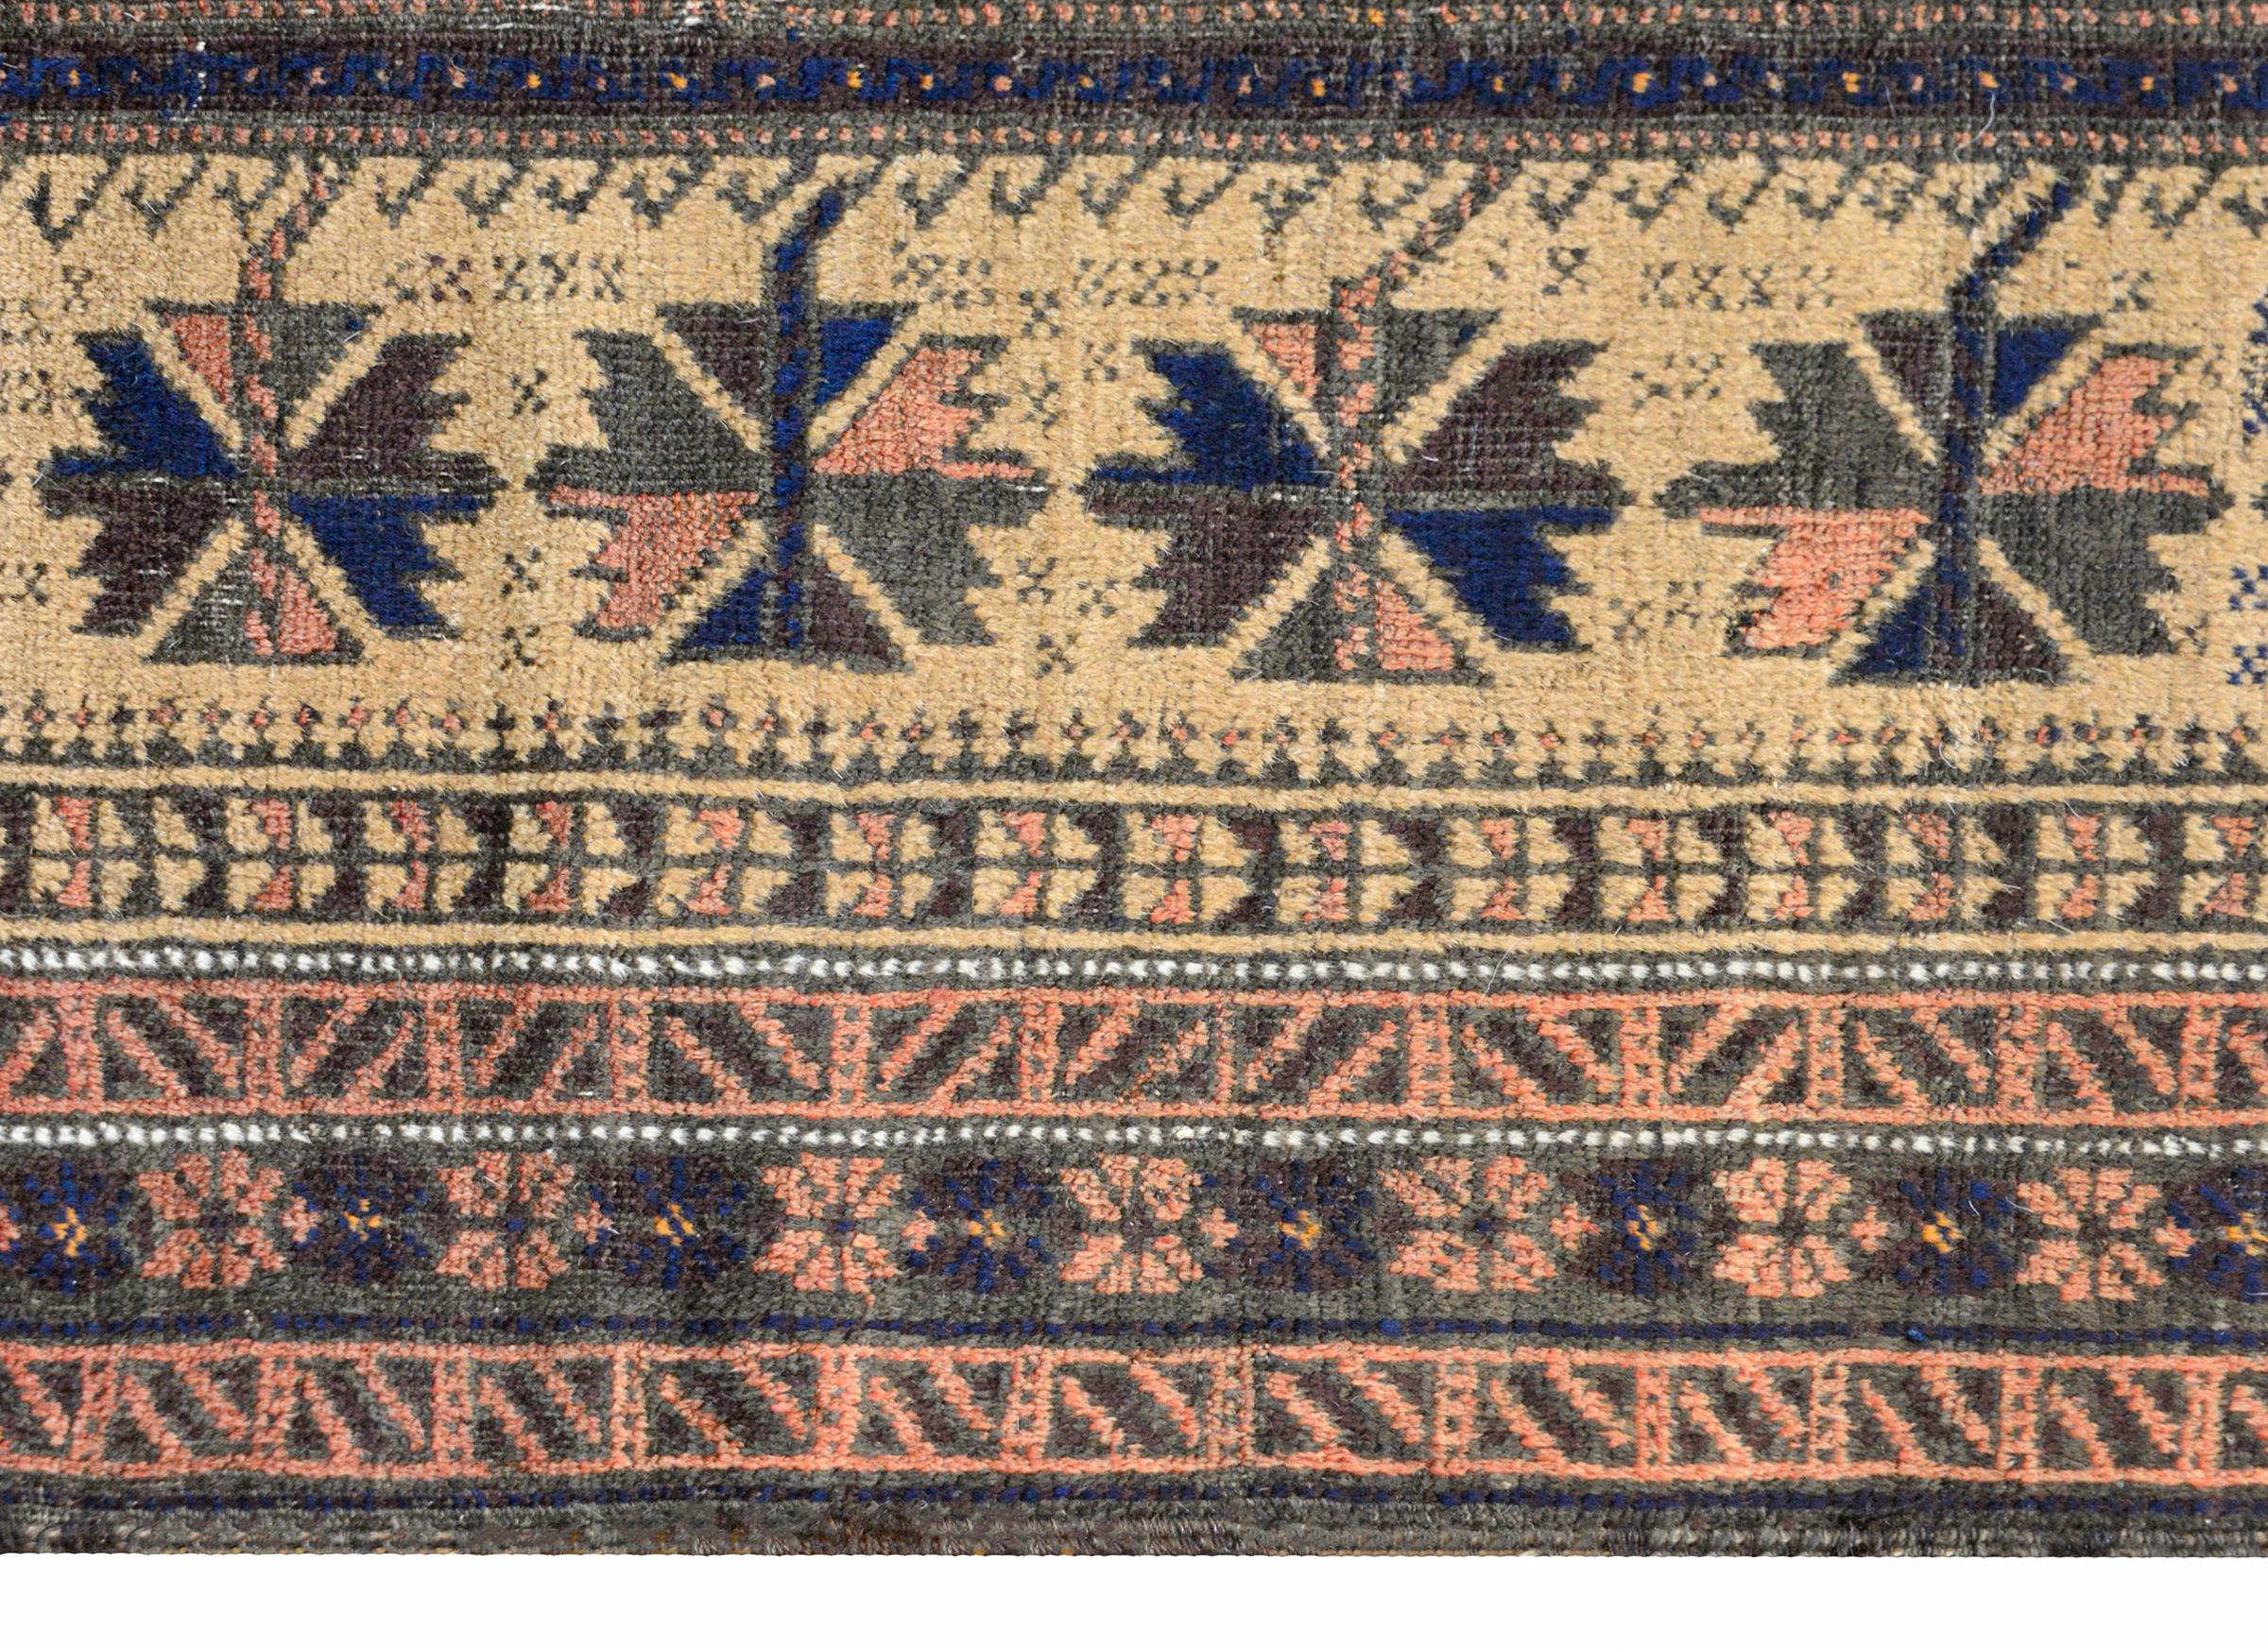 Wool Fantastic Early 20th Century Baluch Prayer Rug For Sale